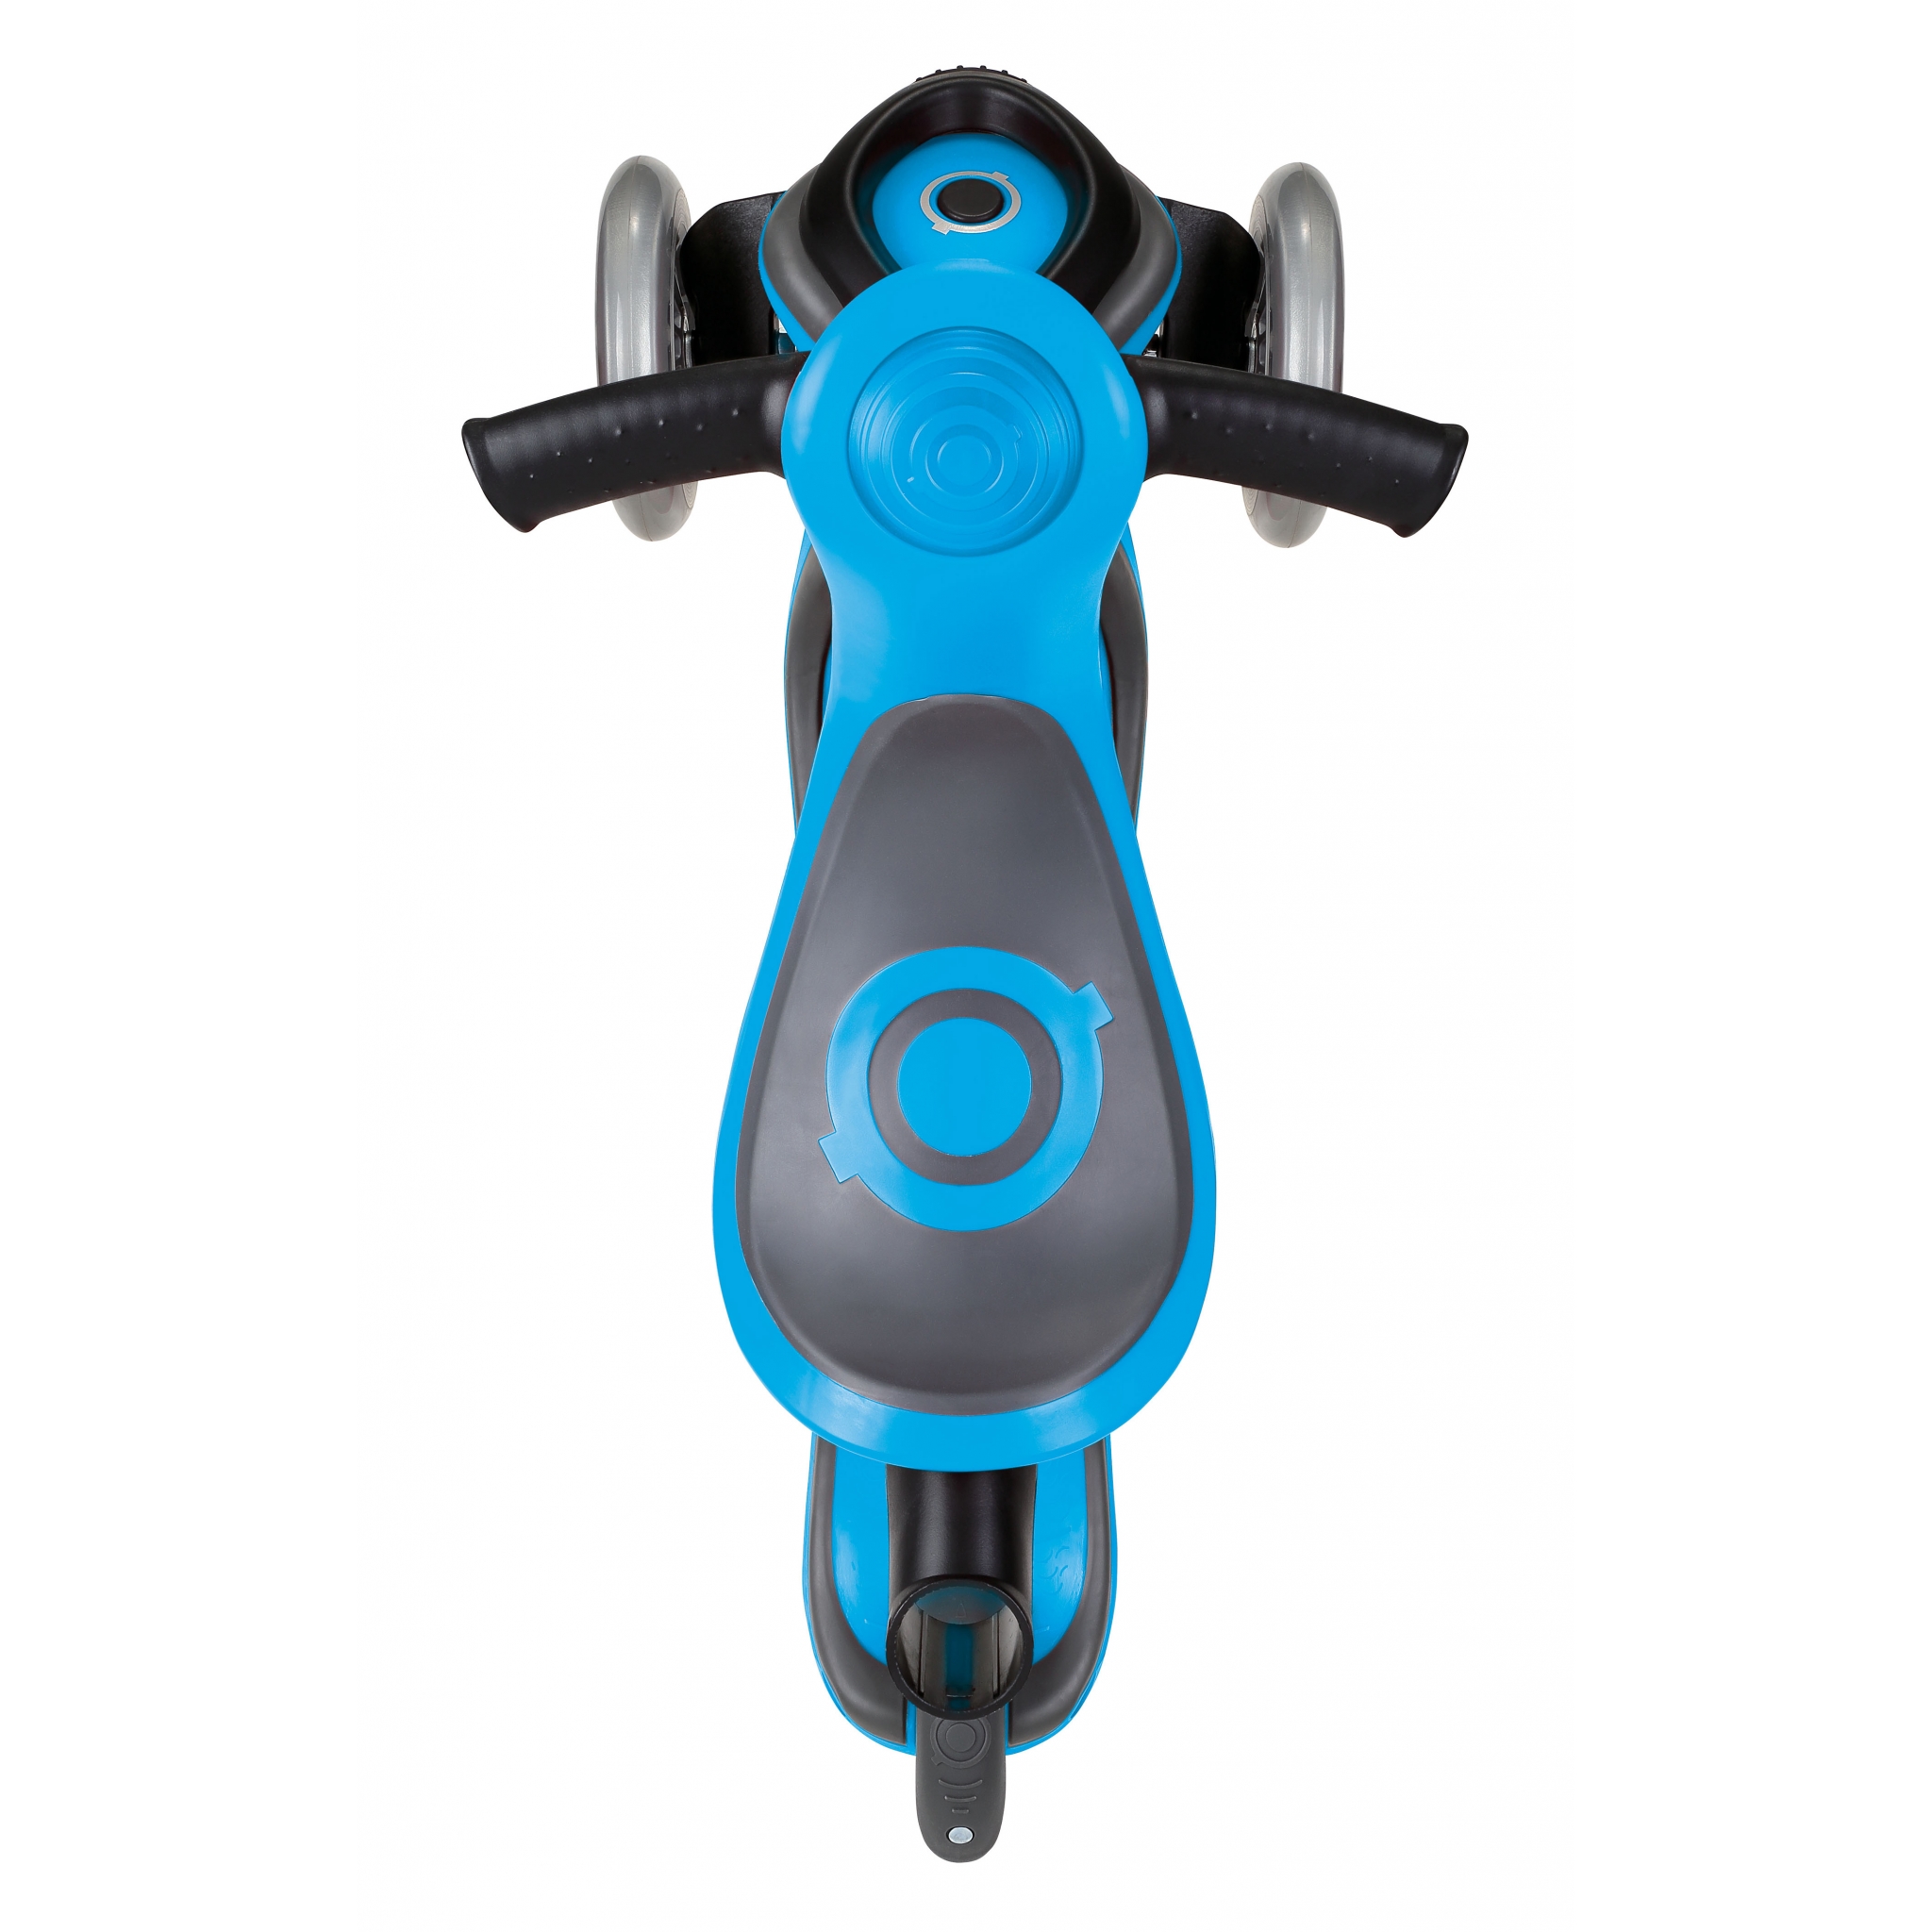 GO-UP-COMFORT-scooter-with-seat-extra-wide-seat-for-maximum-comfort-sky-blue 3